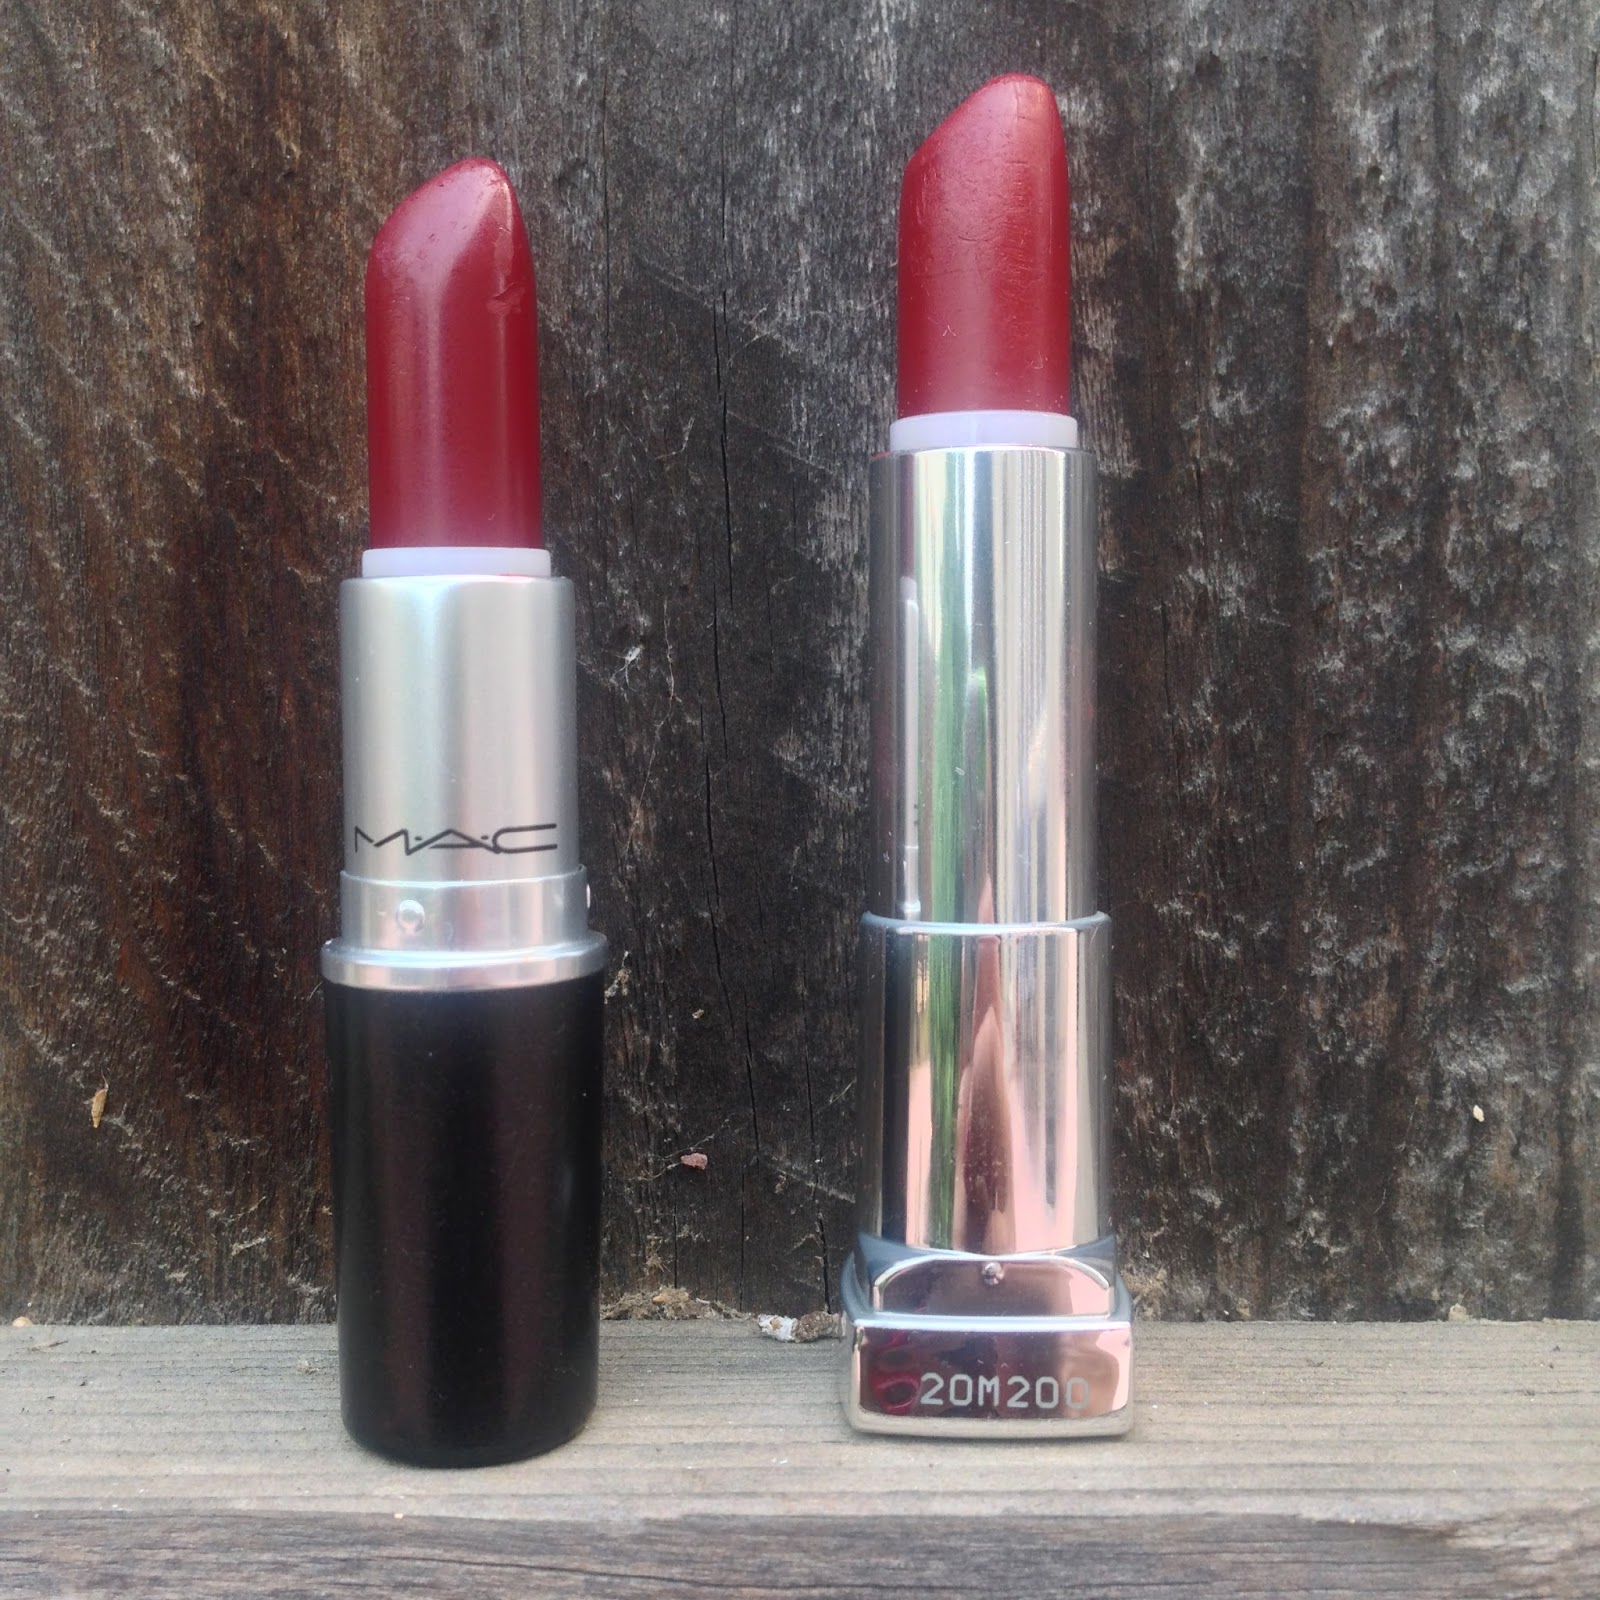 Mac D For Danger And Diva Plus Diva S Dupe Floraful